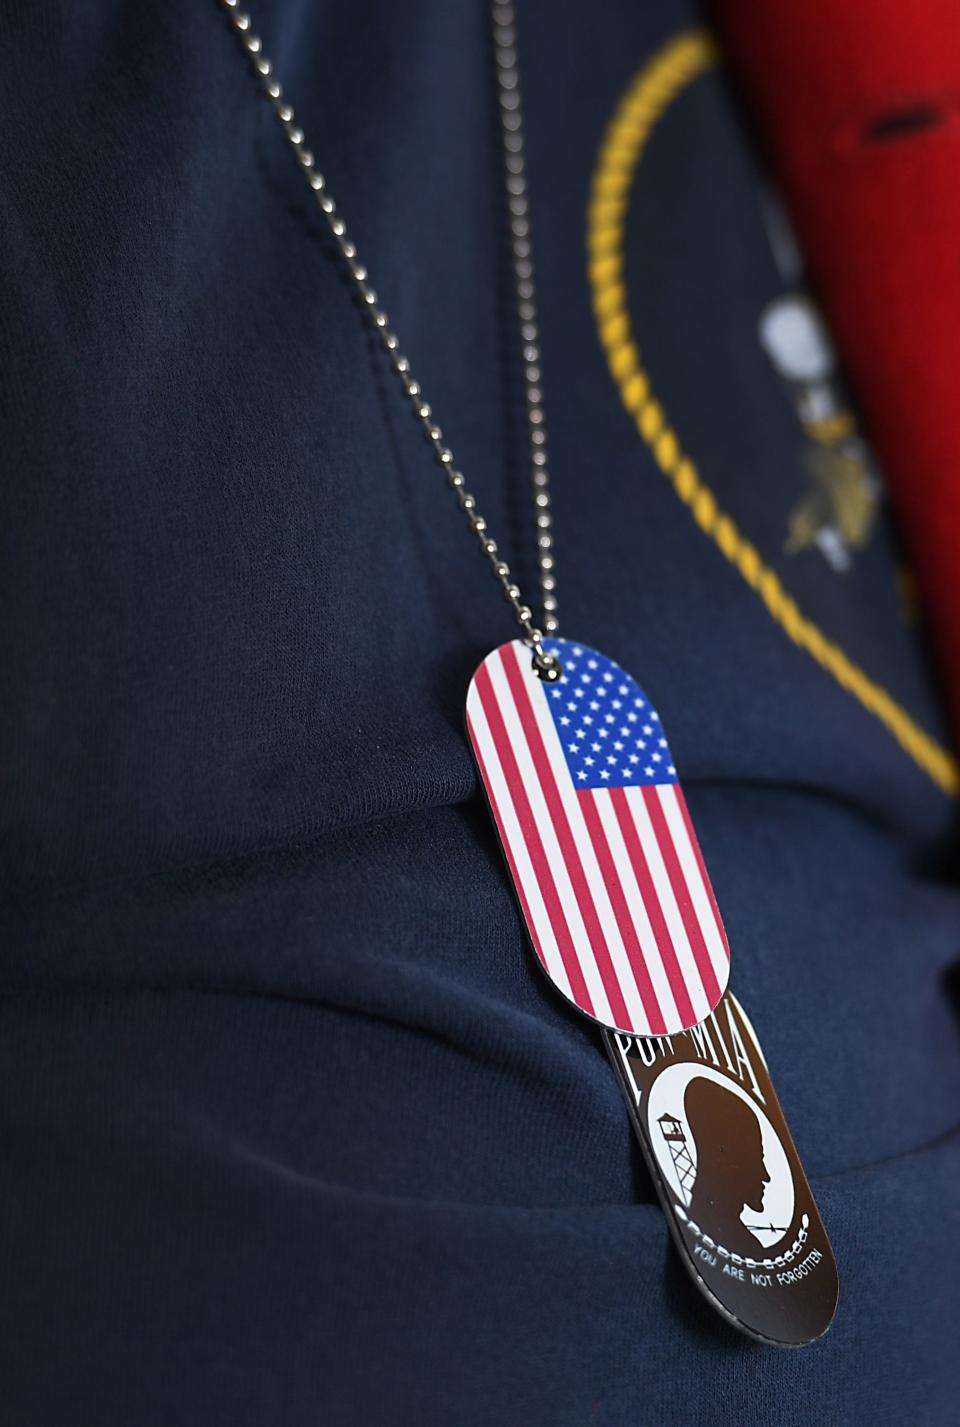 Veterans at the American Legion Post 28 in Spartanburg on Nov. 5, 2022.  Robert Justice, who served in the U.S. Navy Seabees, fought in WWII. Here, he wears dog tags in honor of the American flag and POW/MIA.